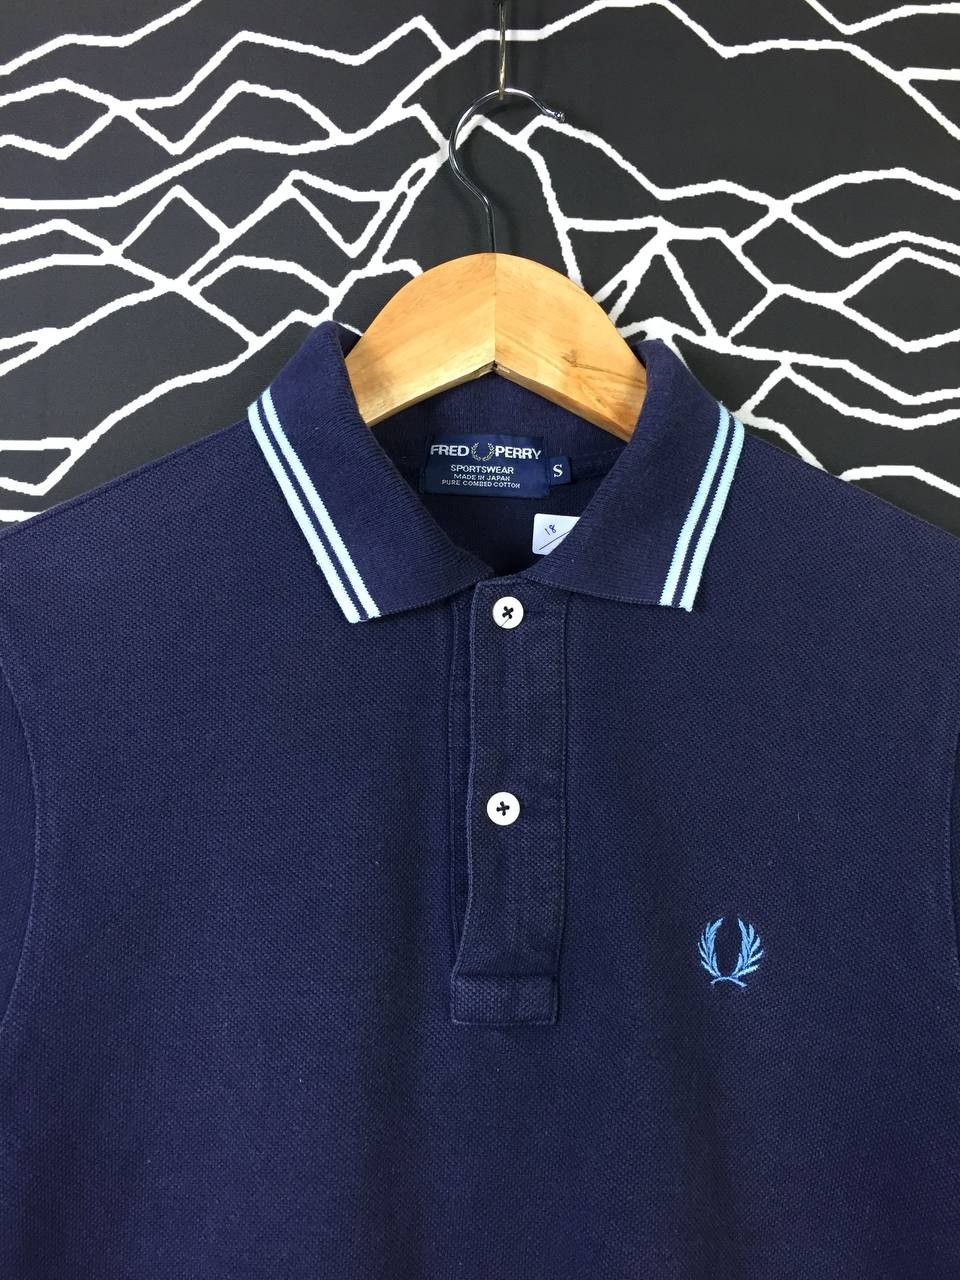 Vintage Vtg Fred Perry Sportswear Twin Tipped Polo Tee Size US S / EU 44-46 / 1 - 3 Thumbnail